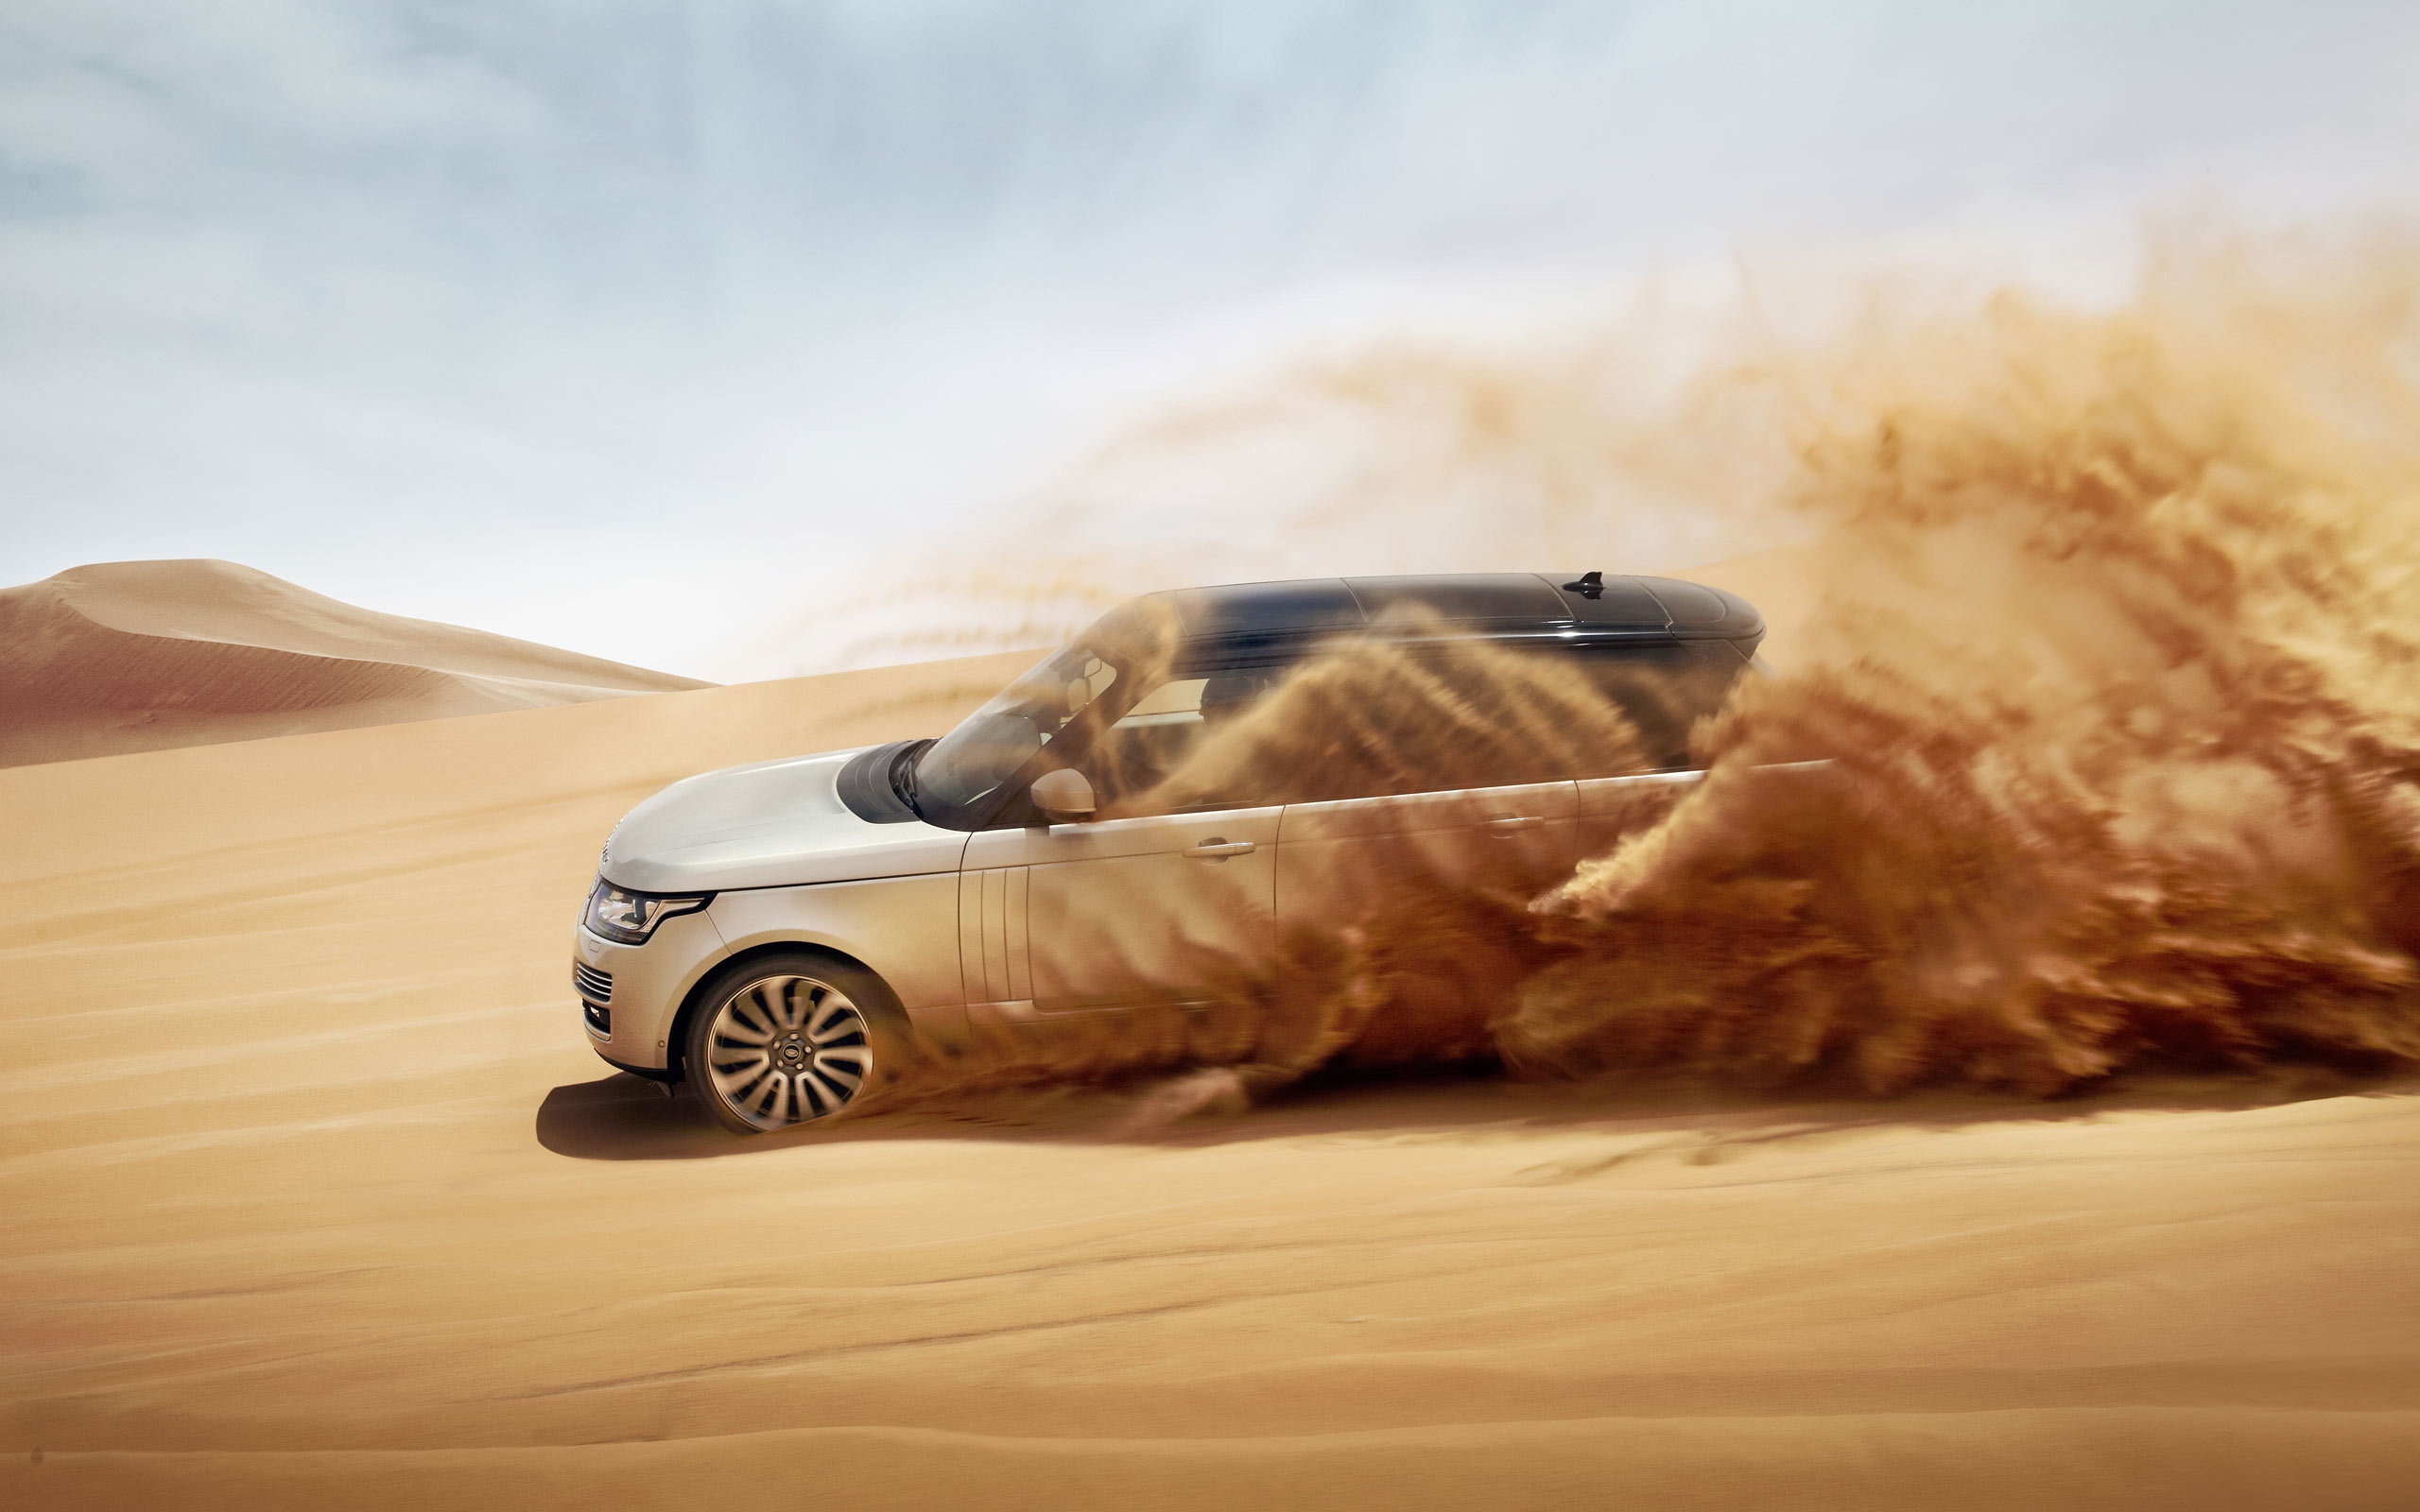 Range Rover Wallpapers - Land Rover On Sand Dunes - HD Wallpaper 